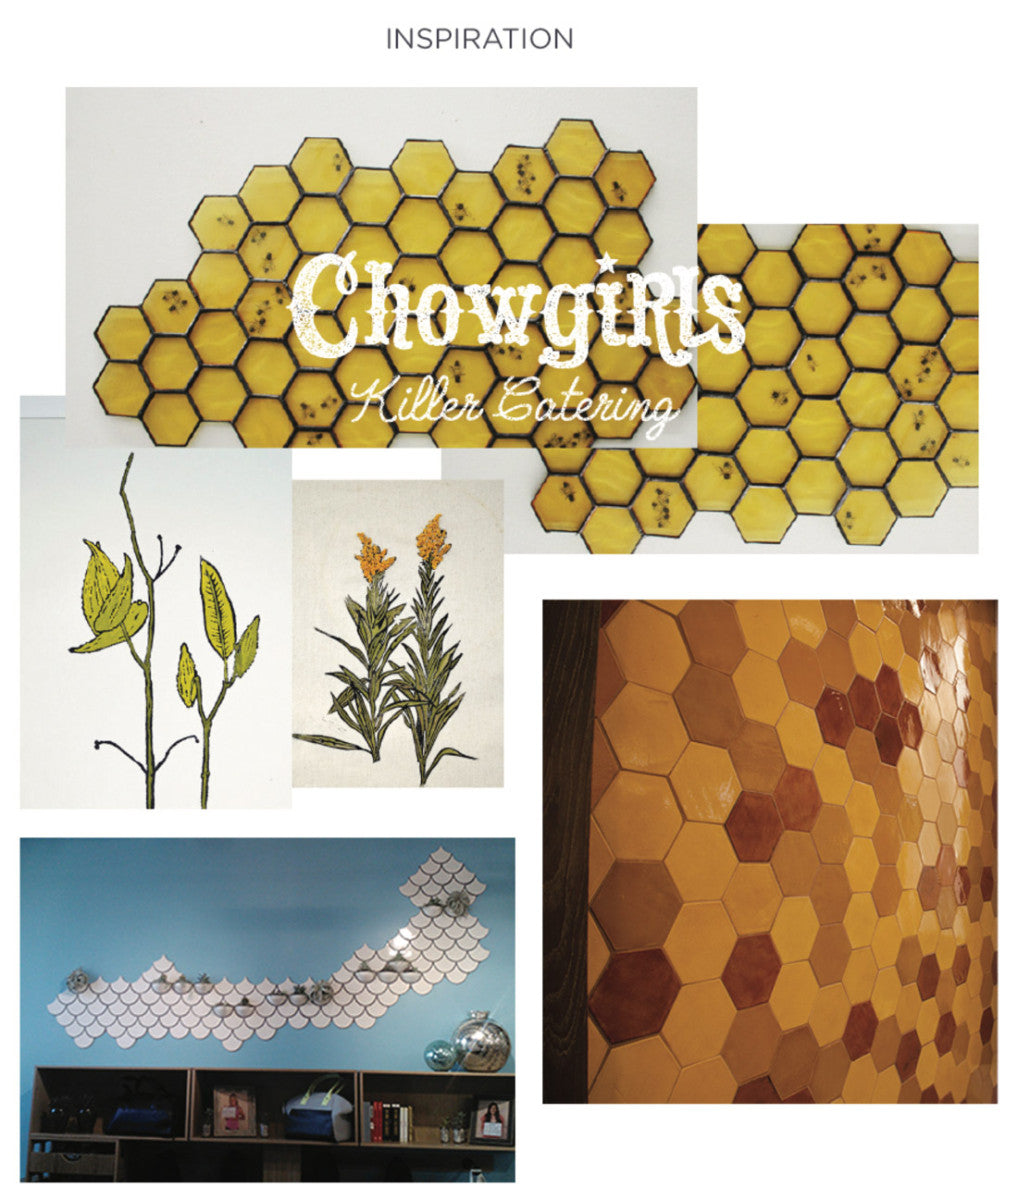 Chowgirls-Mercury-Mosaics-Tile Chowgirls Killer Catering New HQ with Handmade Tile Kitchens Retail/Commercial Tile Education Tile Inspiration   Tile-Inspiration-Mercury-Mosaics Chowgirls Killer Catering New HQ with Handmade Tile Kitchens Retail/Commercial Tile Education Tile Inspiration   